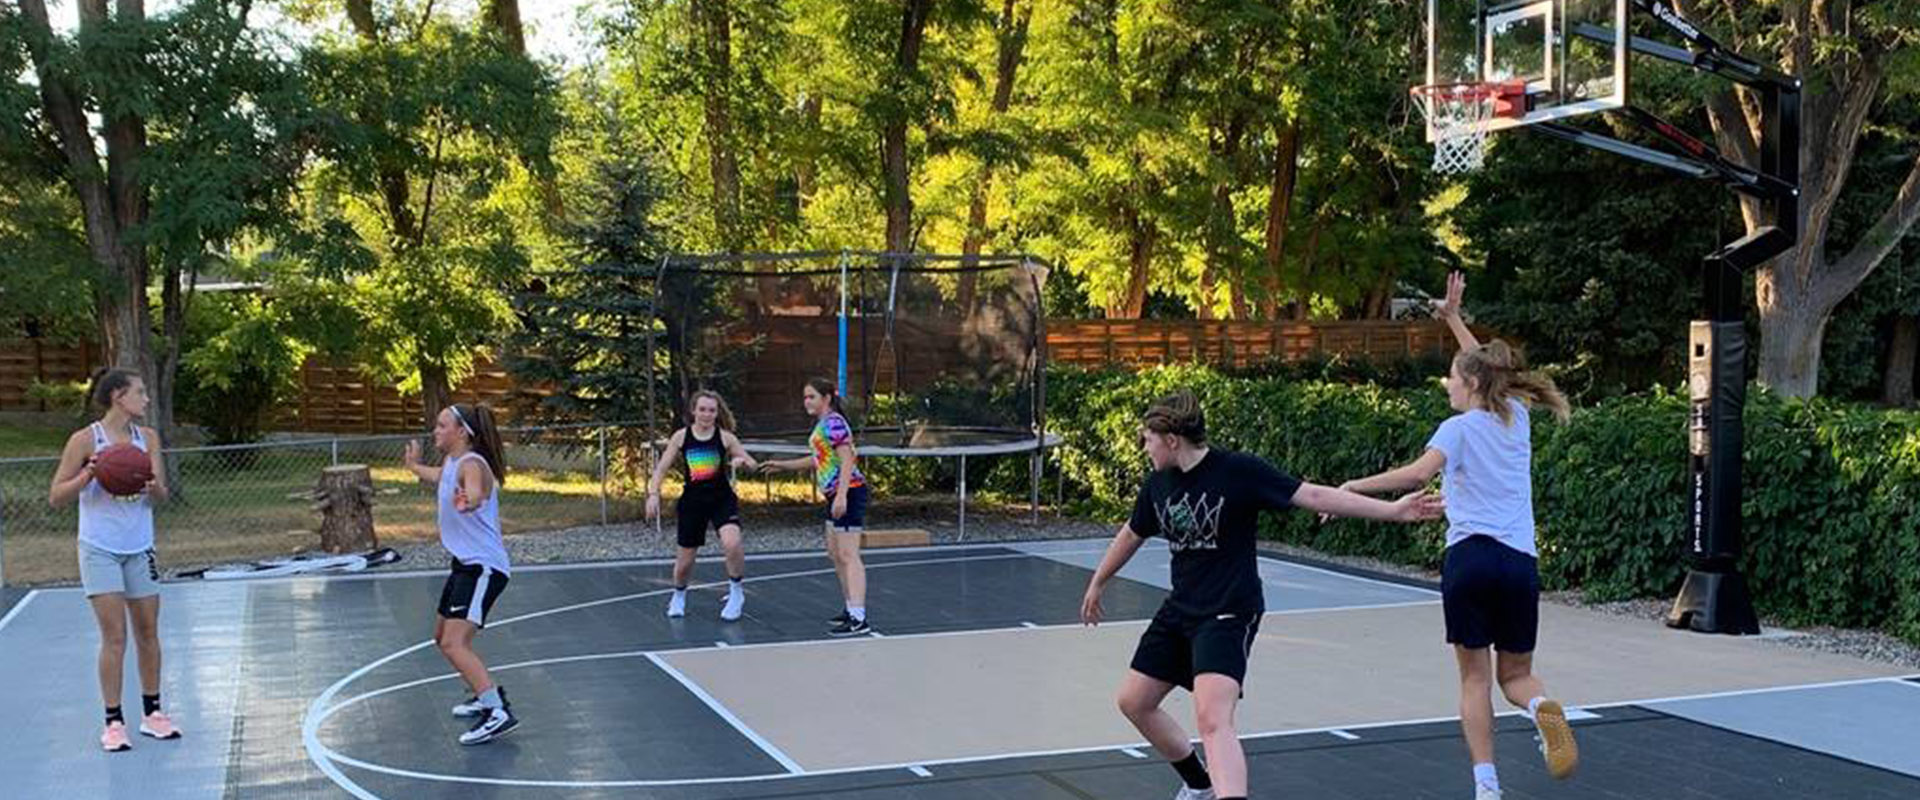 Friends playing a game on their backyard half court